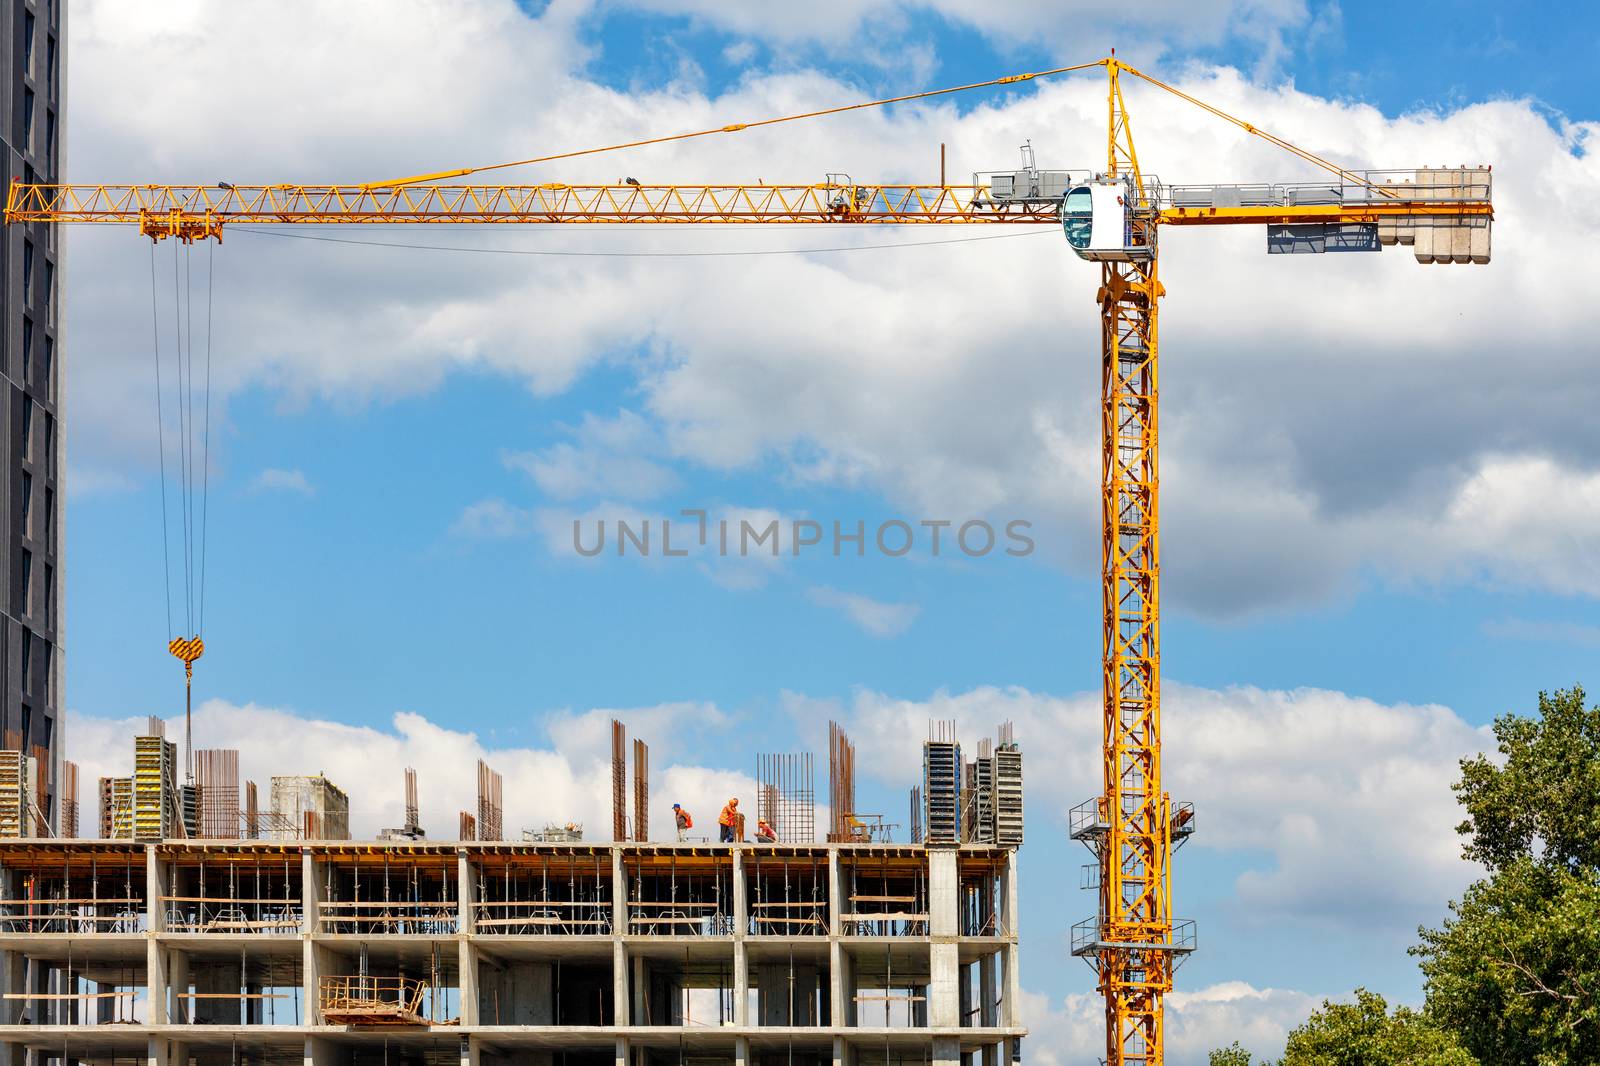 Tower crane works at the construction site of a multi-storey residential building against a blue cloudy sky. Copy space.